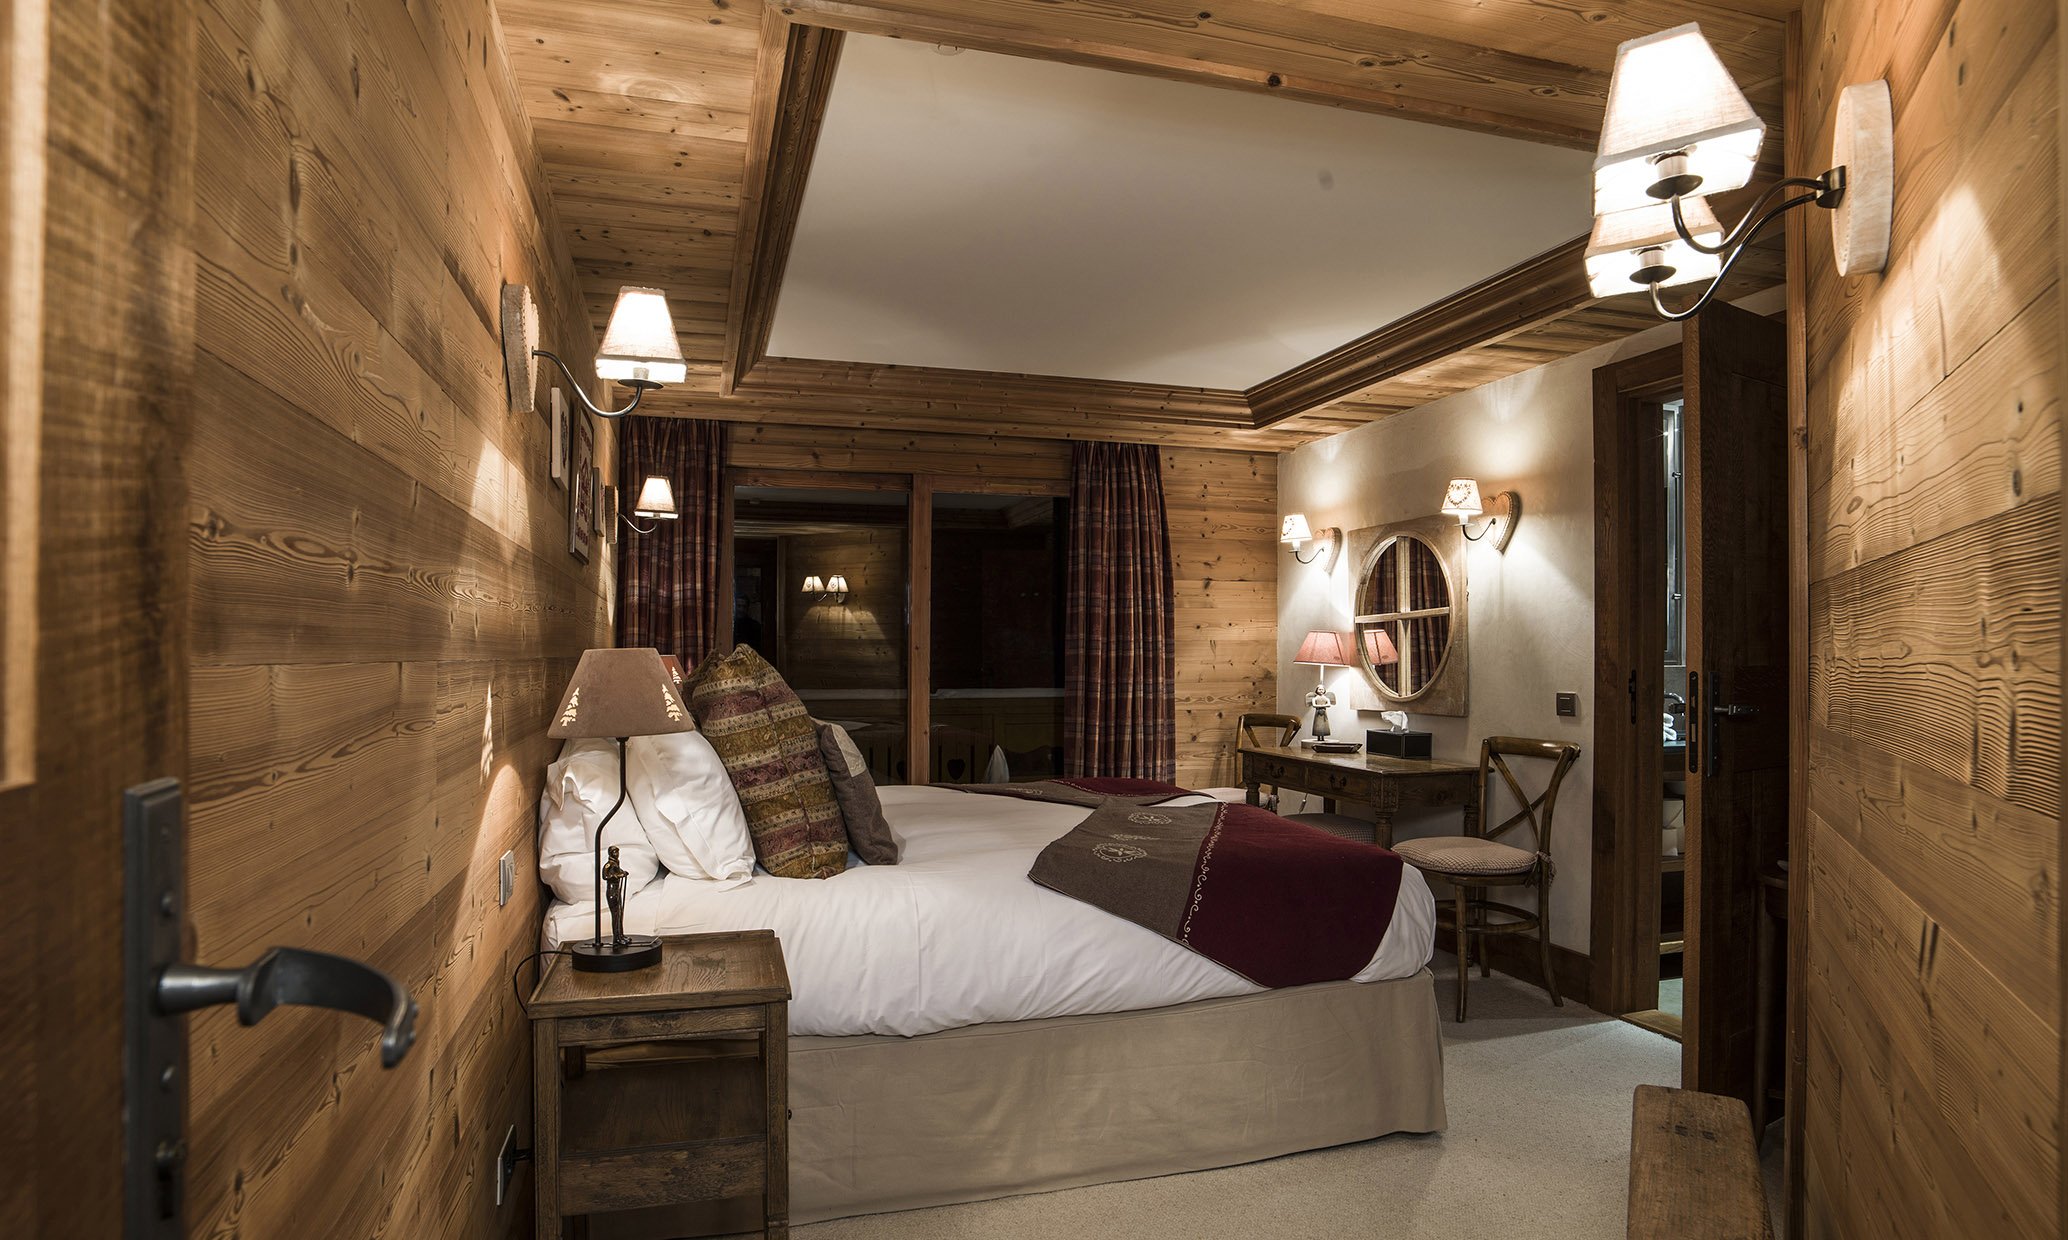 One of the comfortable bedrooms in Chalet Lapin Blanc Meribel